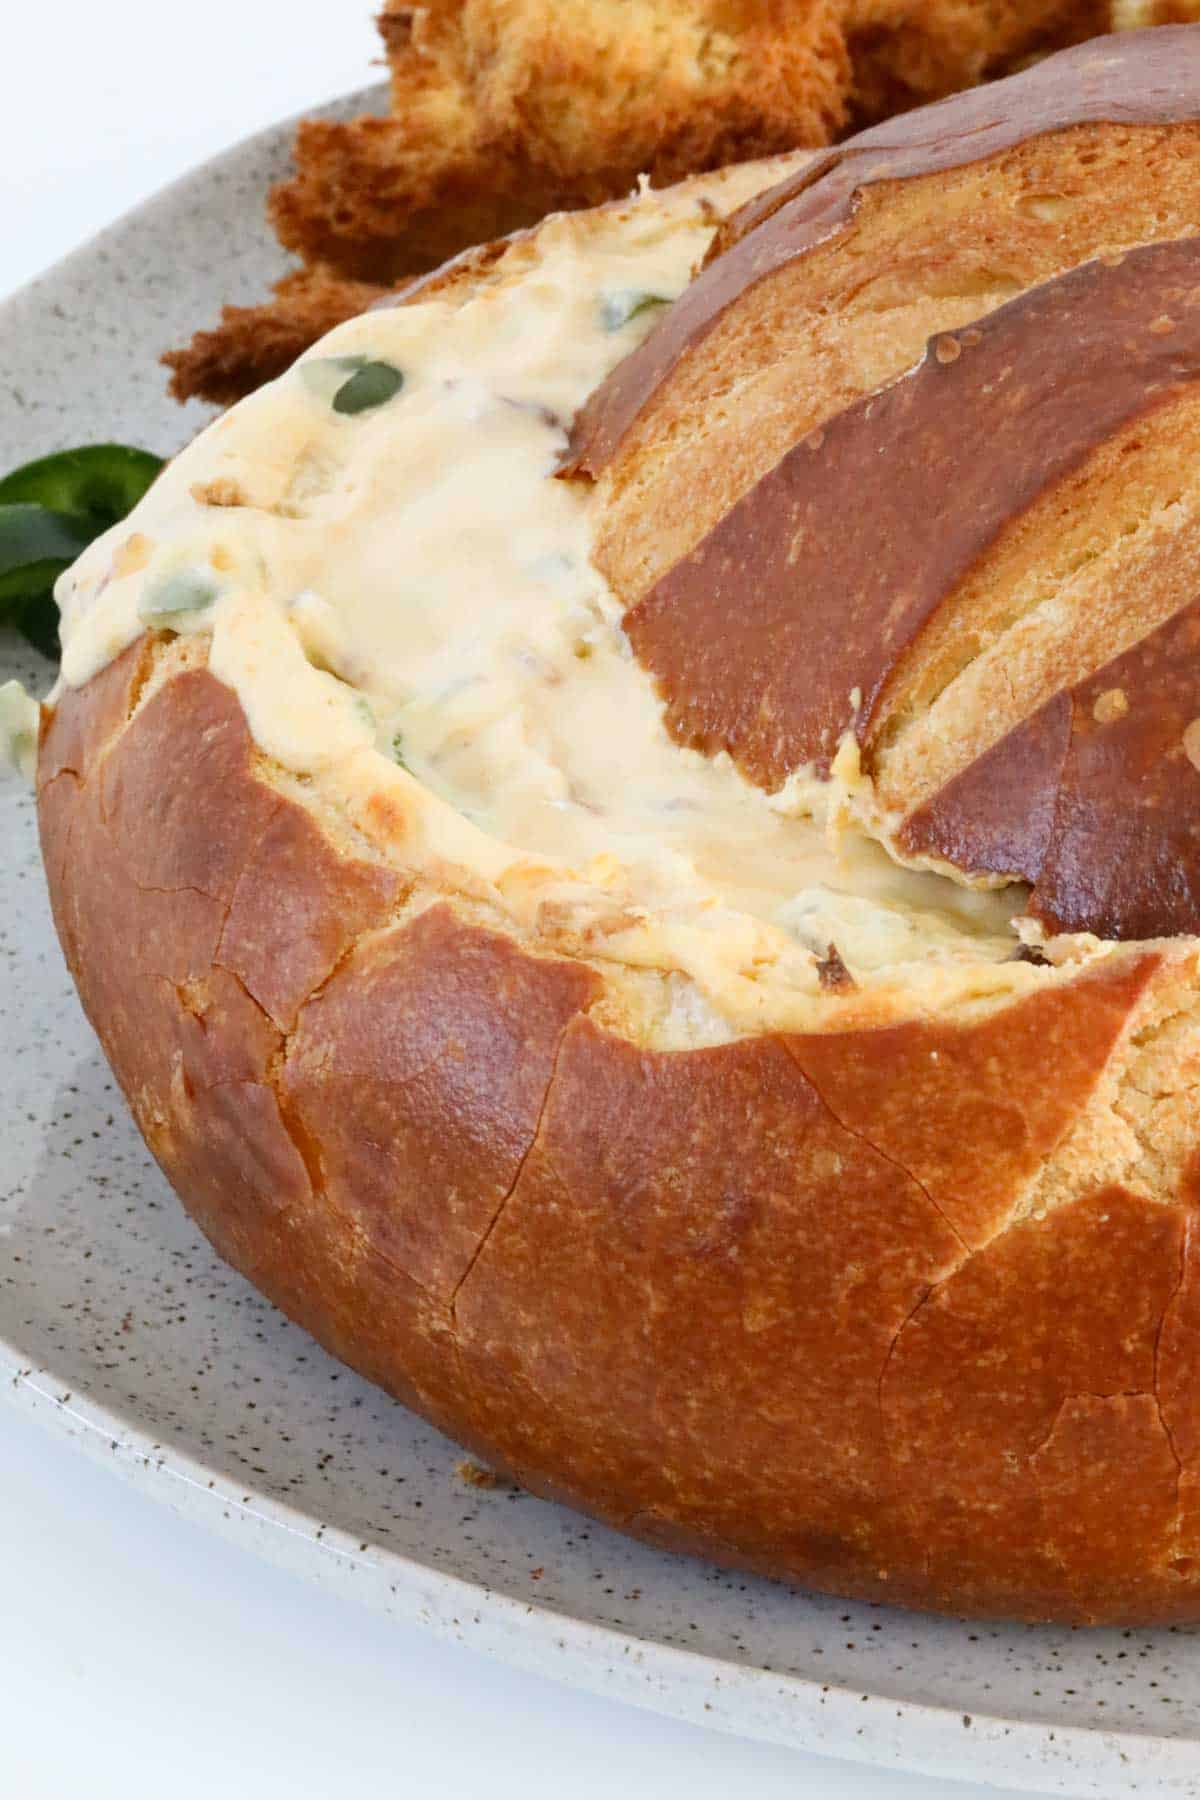 The baked cob loaf dip with the bread lid on top.